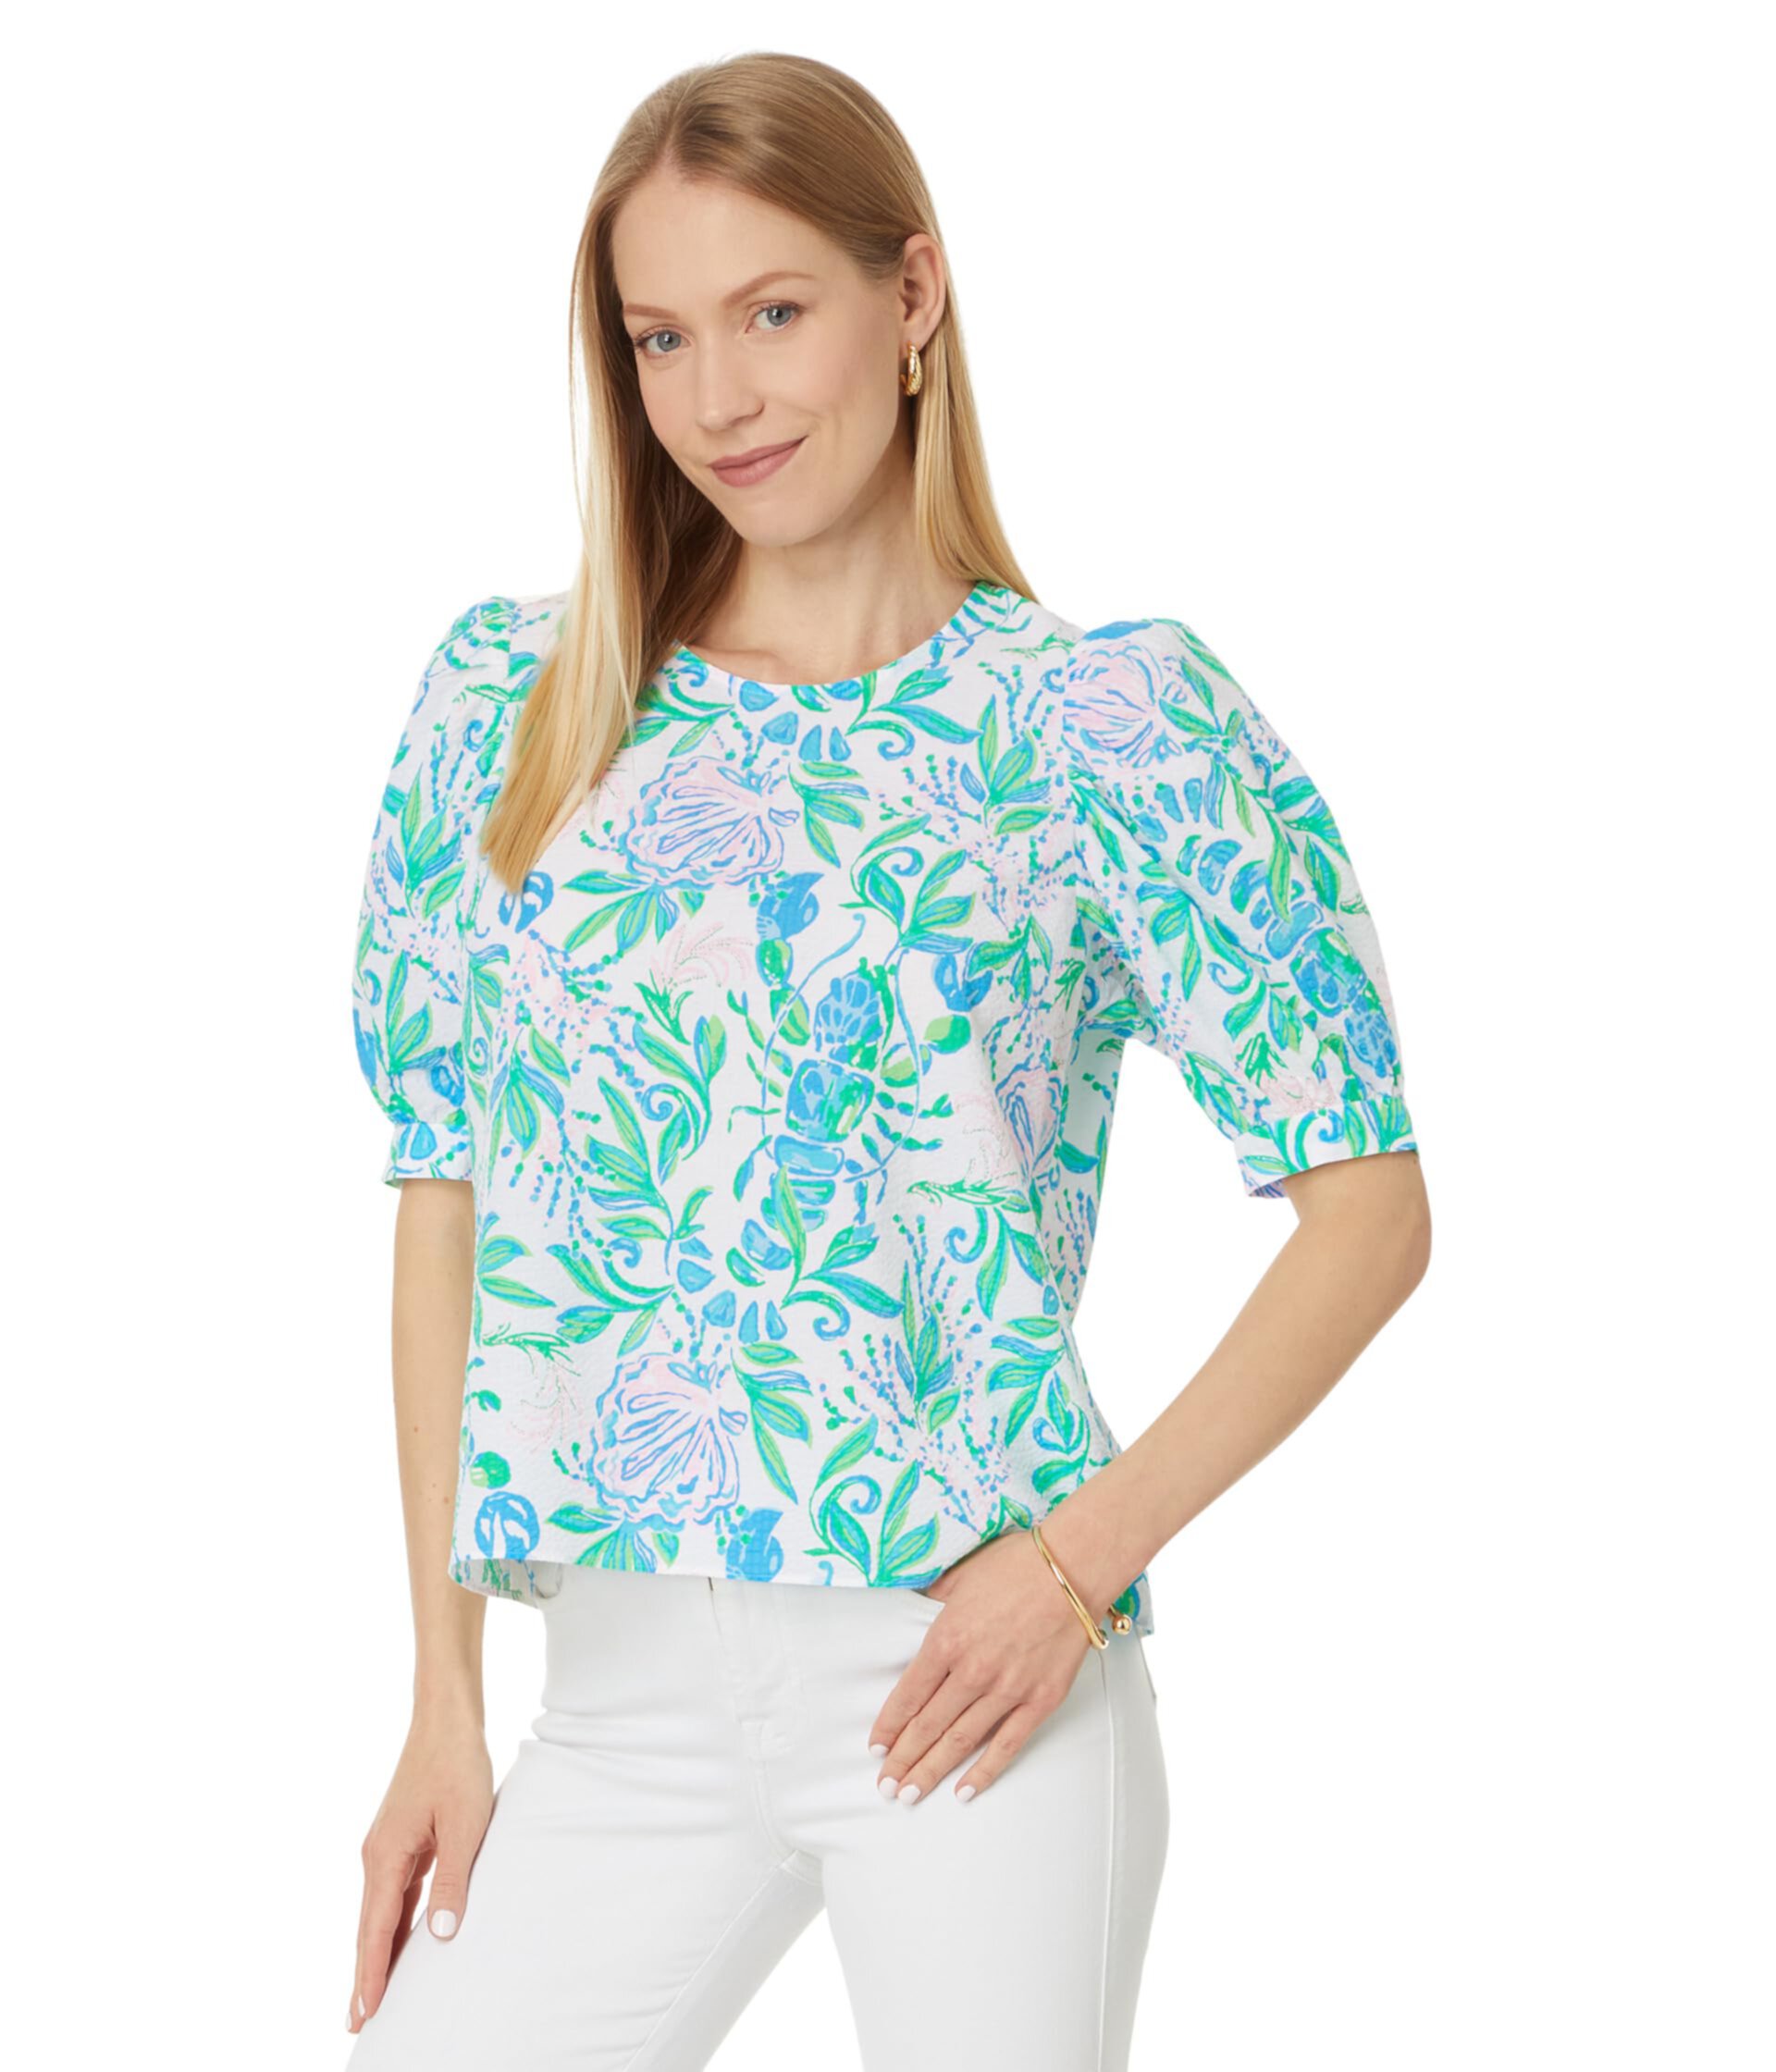 Masieleigh Short Sleeve Cotton Top Lilly Pulitzer